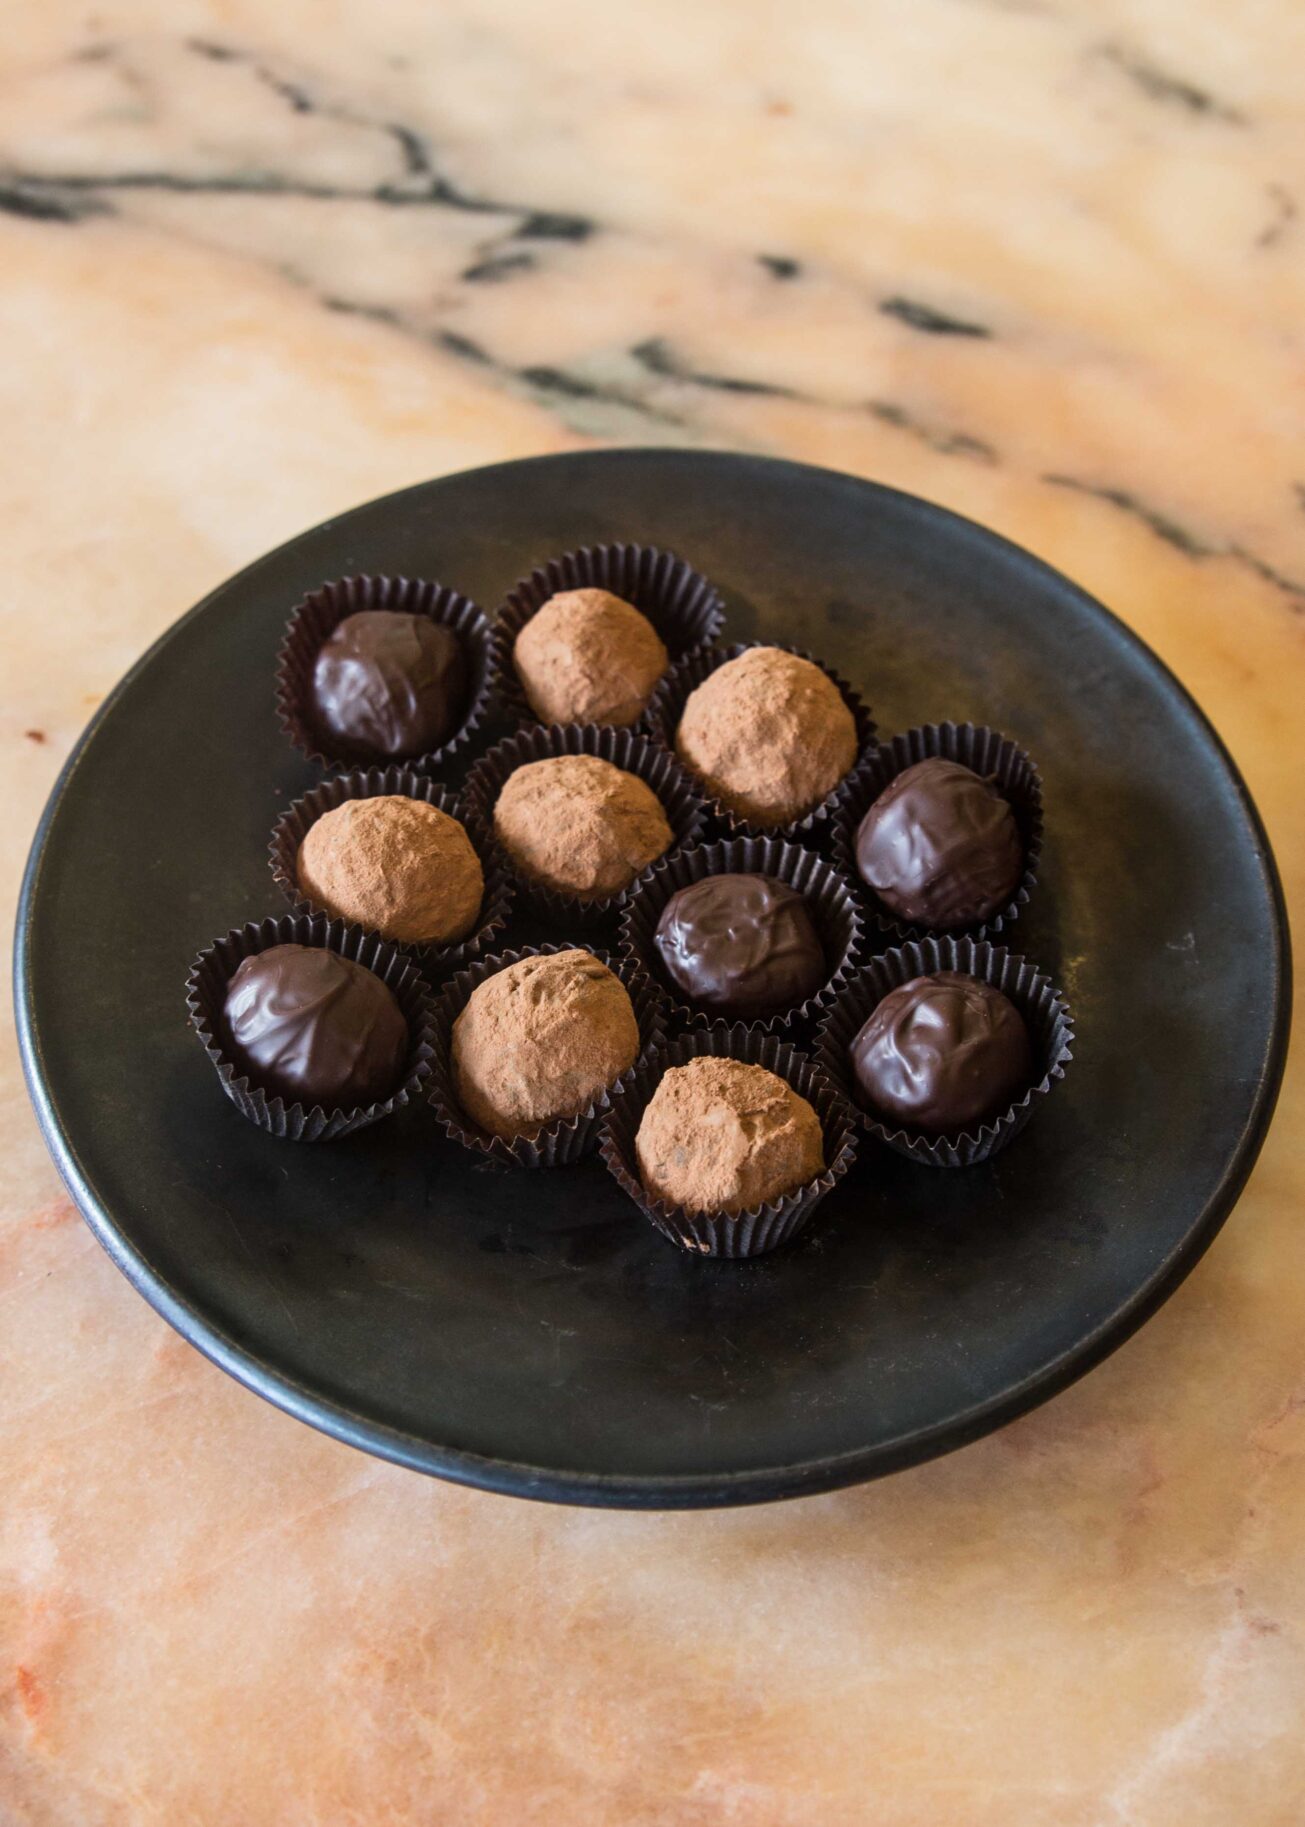 Alice Medrich shows you how to make enrobed chocolates with rich fig filling. Learn her cocoa dusted truffles recipe.